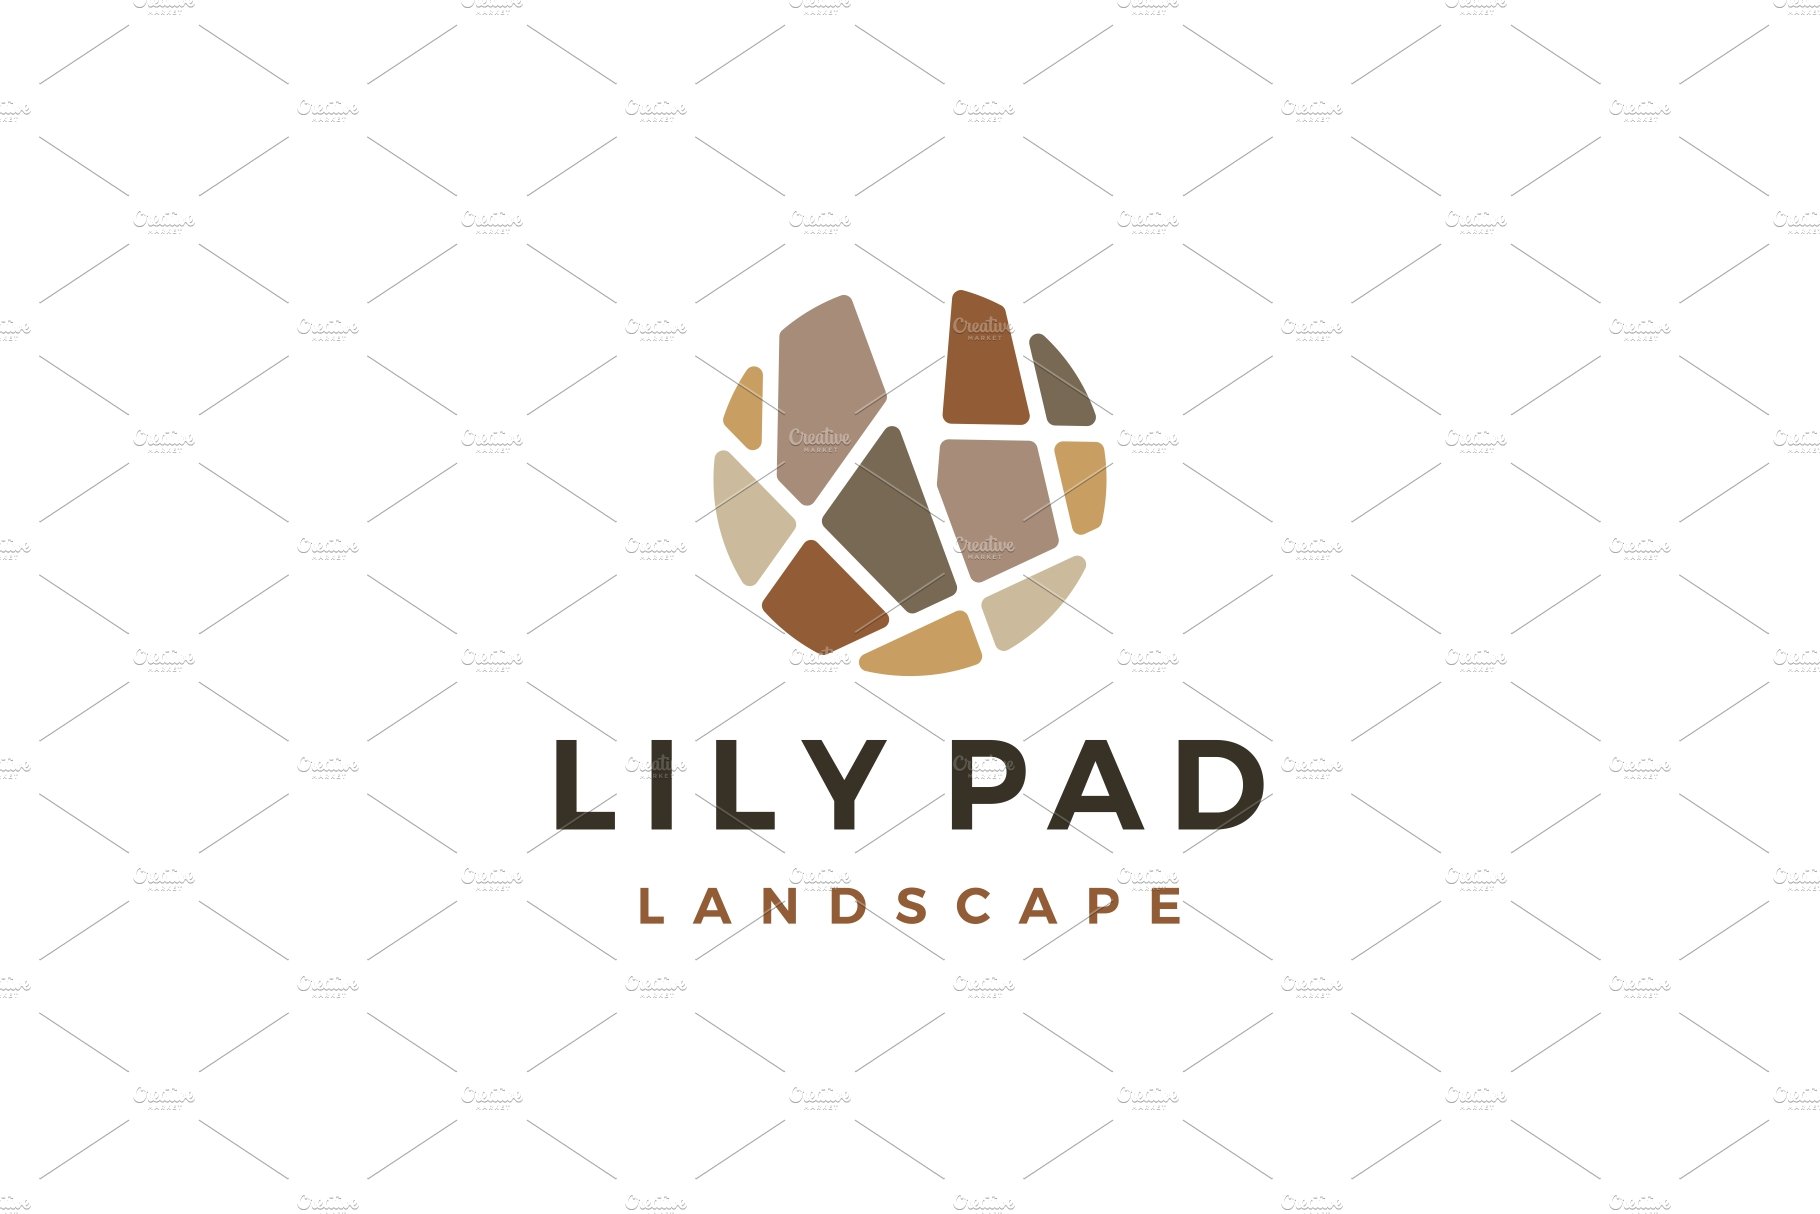 lily pad stone landscape landscaping cover image.